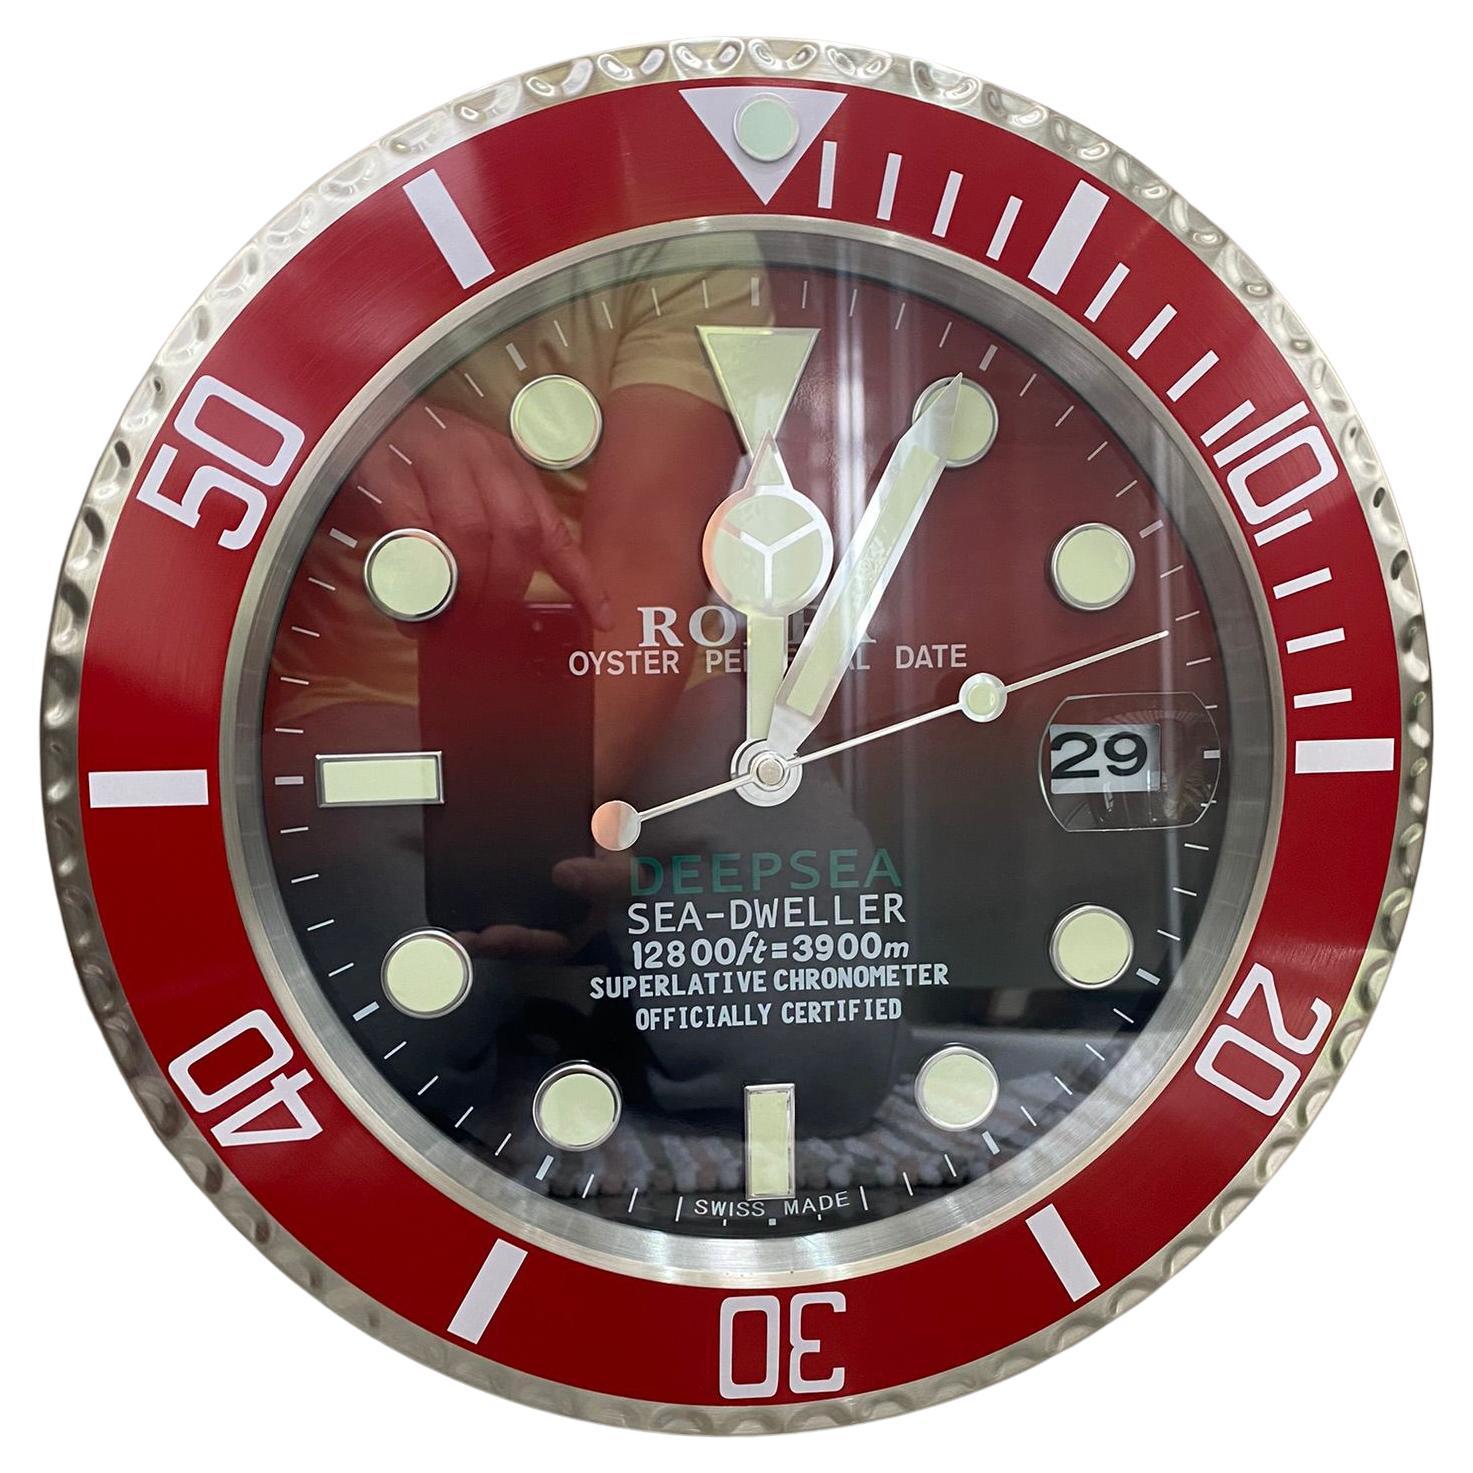 ROLEX Officially Certified Oyster Perpetual Date Red Submariner Wall Clock 